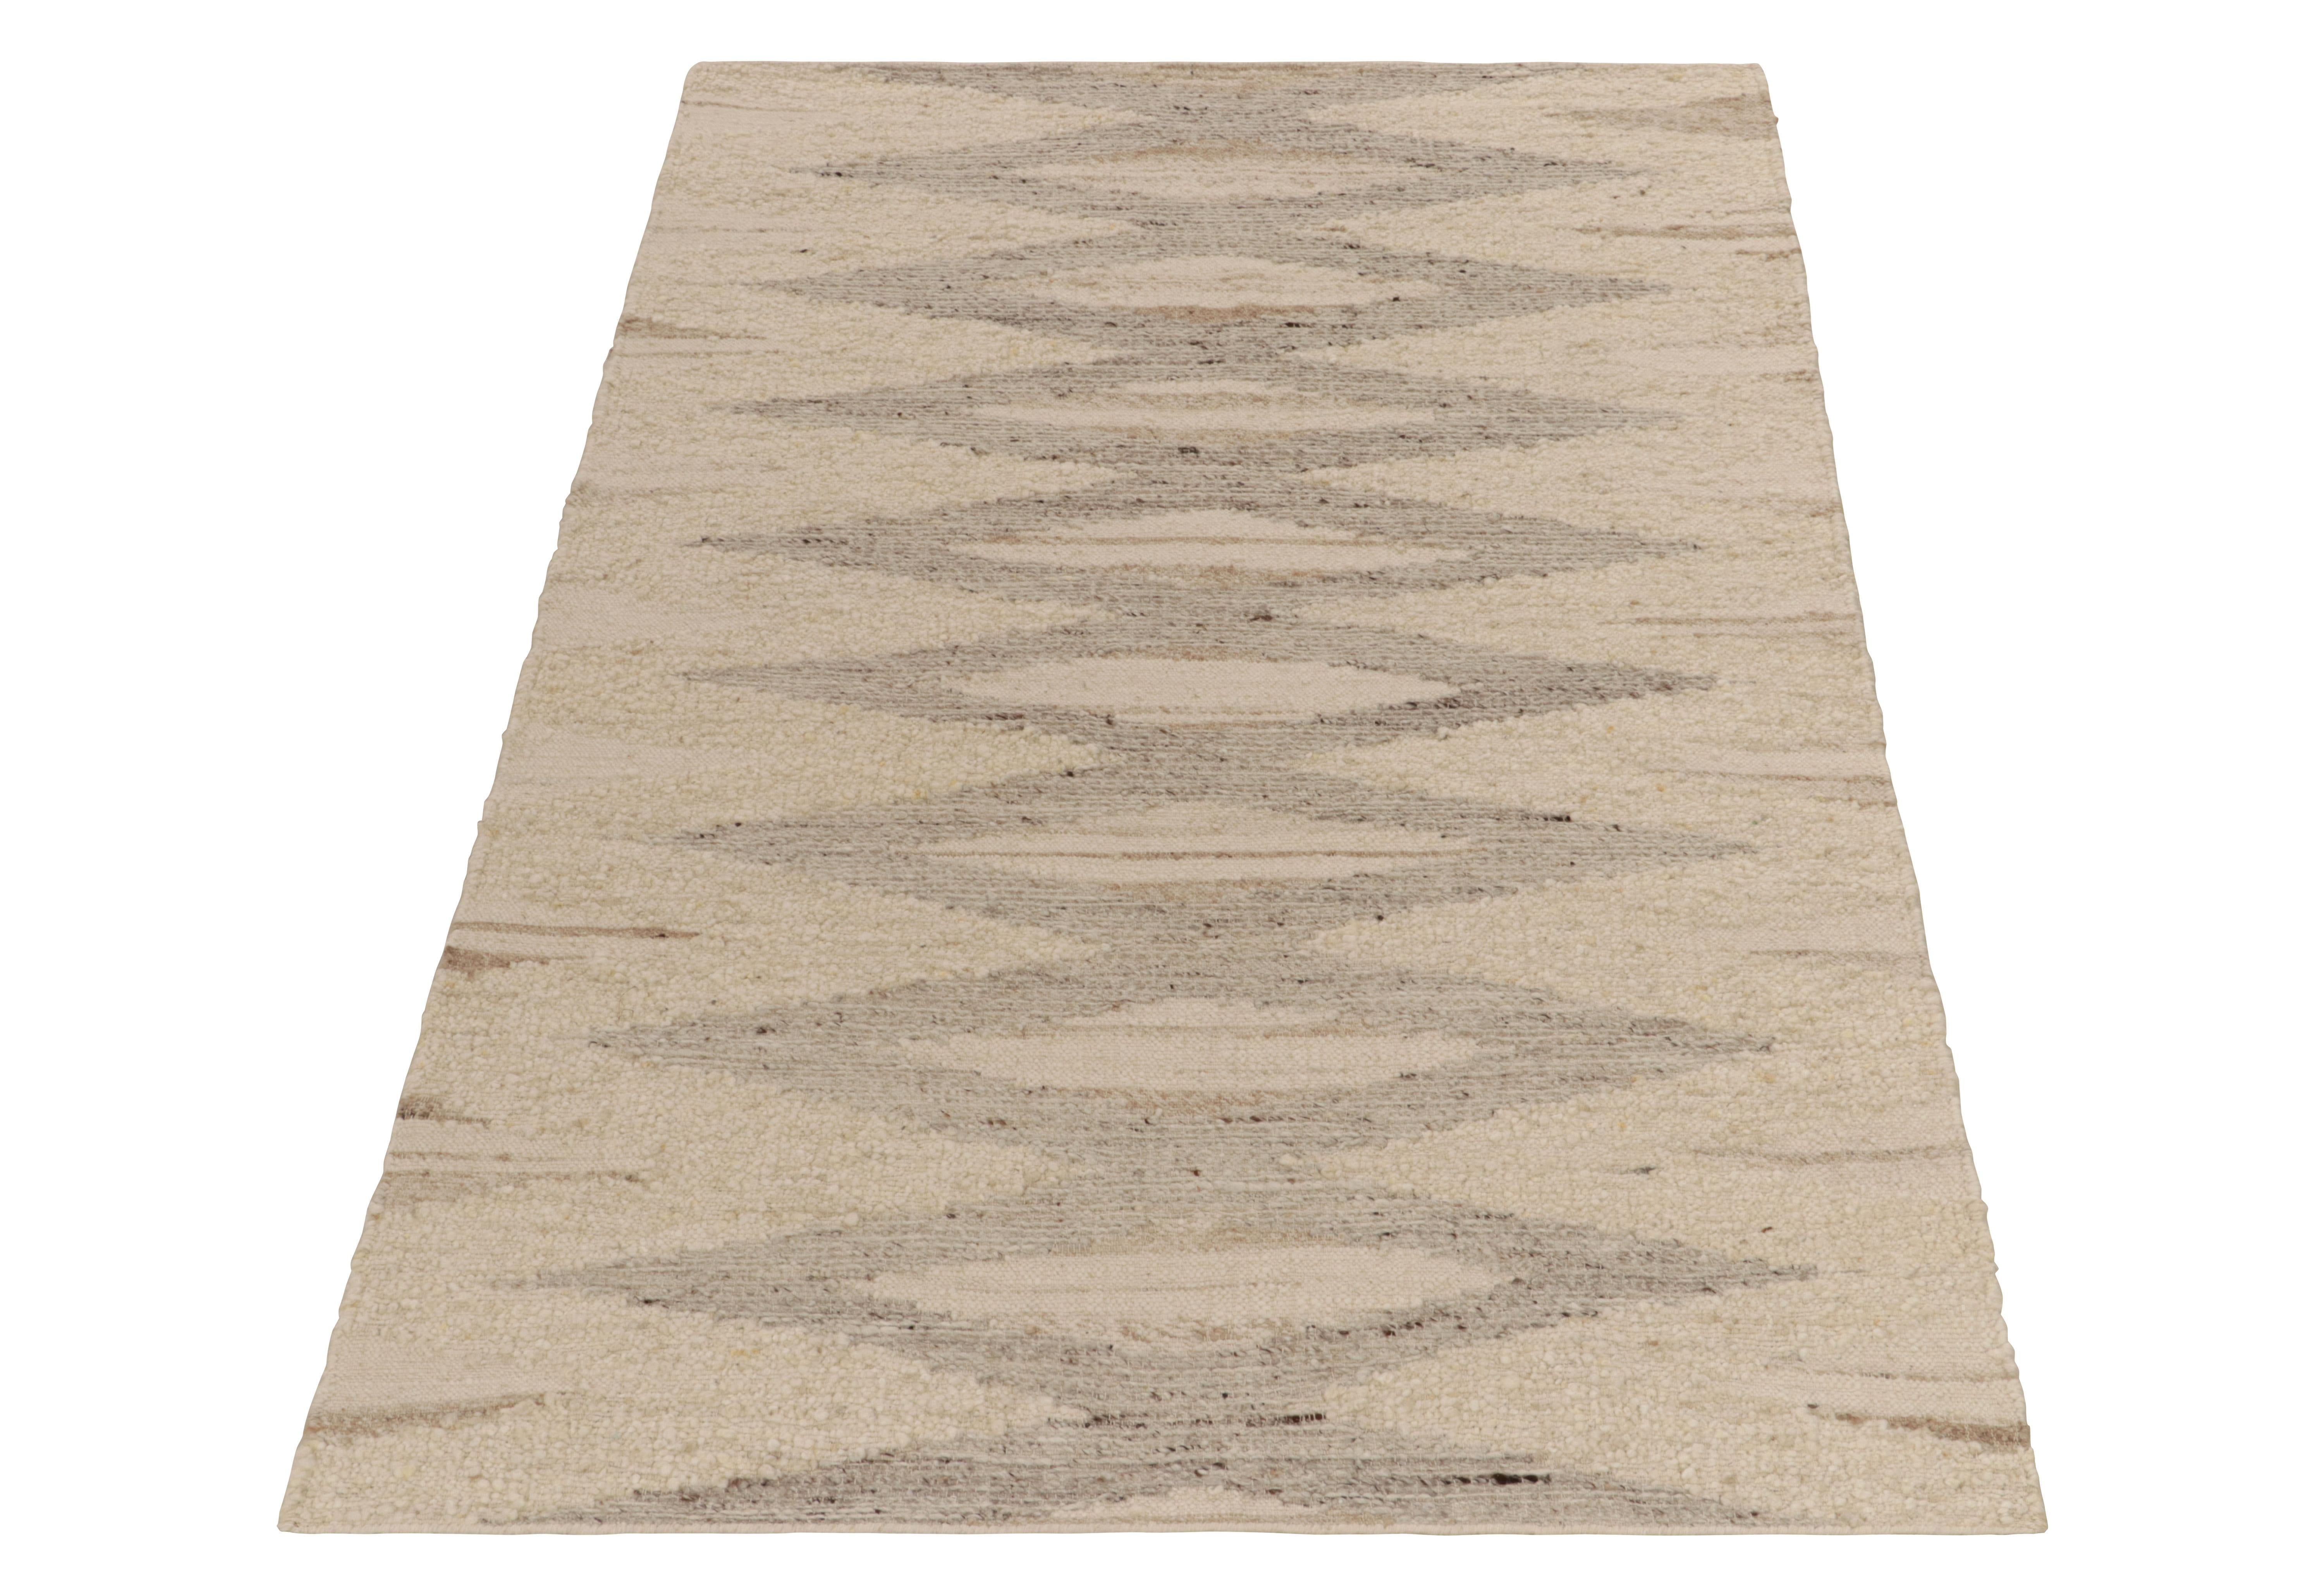 Rug & Kilim presents a bold contemporary take on Deco styles and flat weave aesthetics with this 5x8 handspun piece. The Kilim rug features a modern geometric pattern in a comforting beige brown colorway for an exceptional sense of movement in a